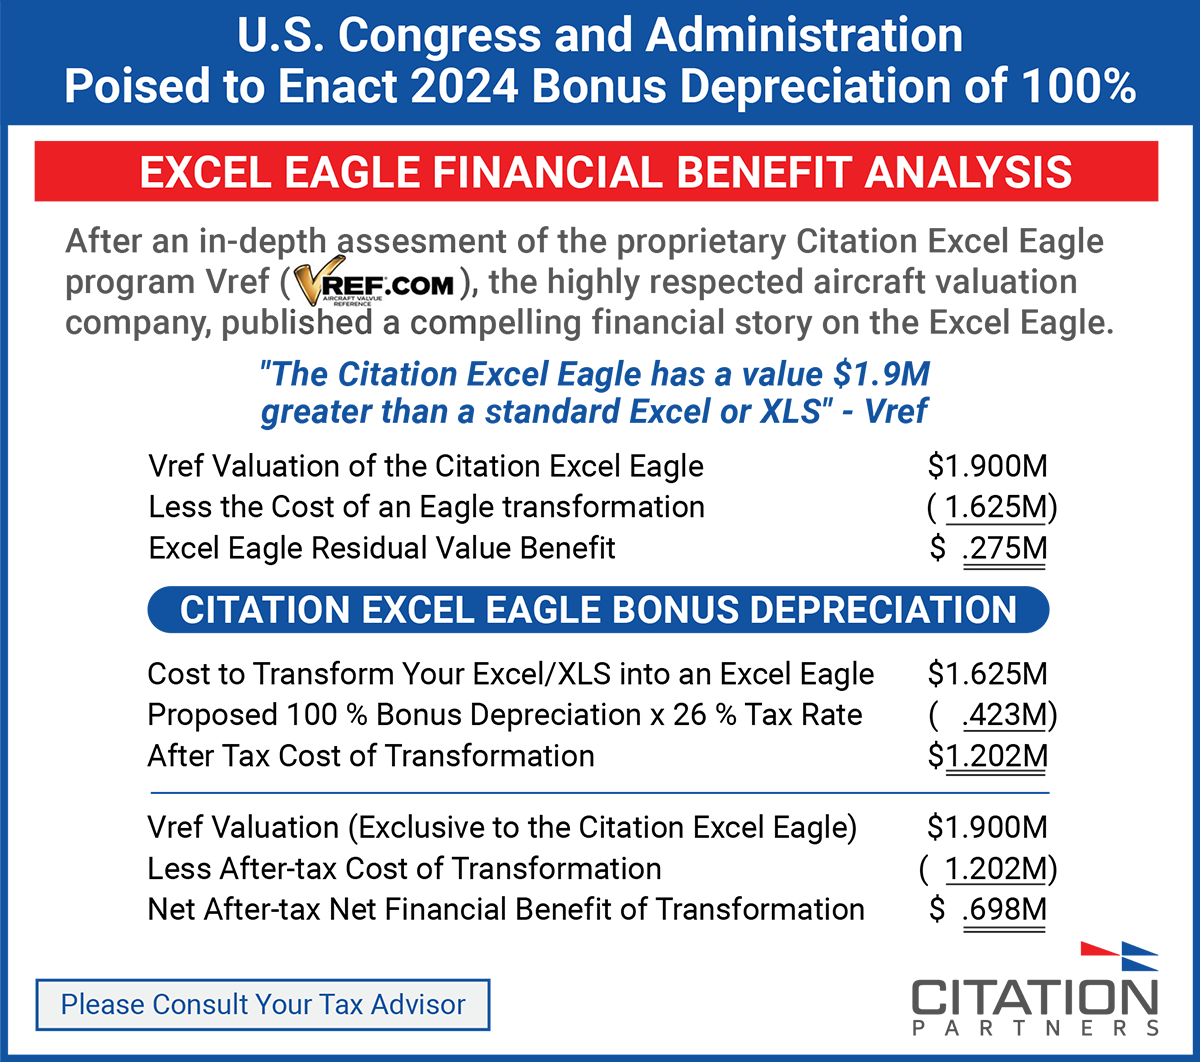 Excel Eagle Financial Benefit Analysis